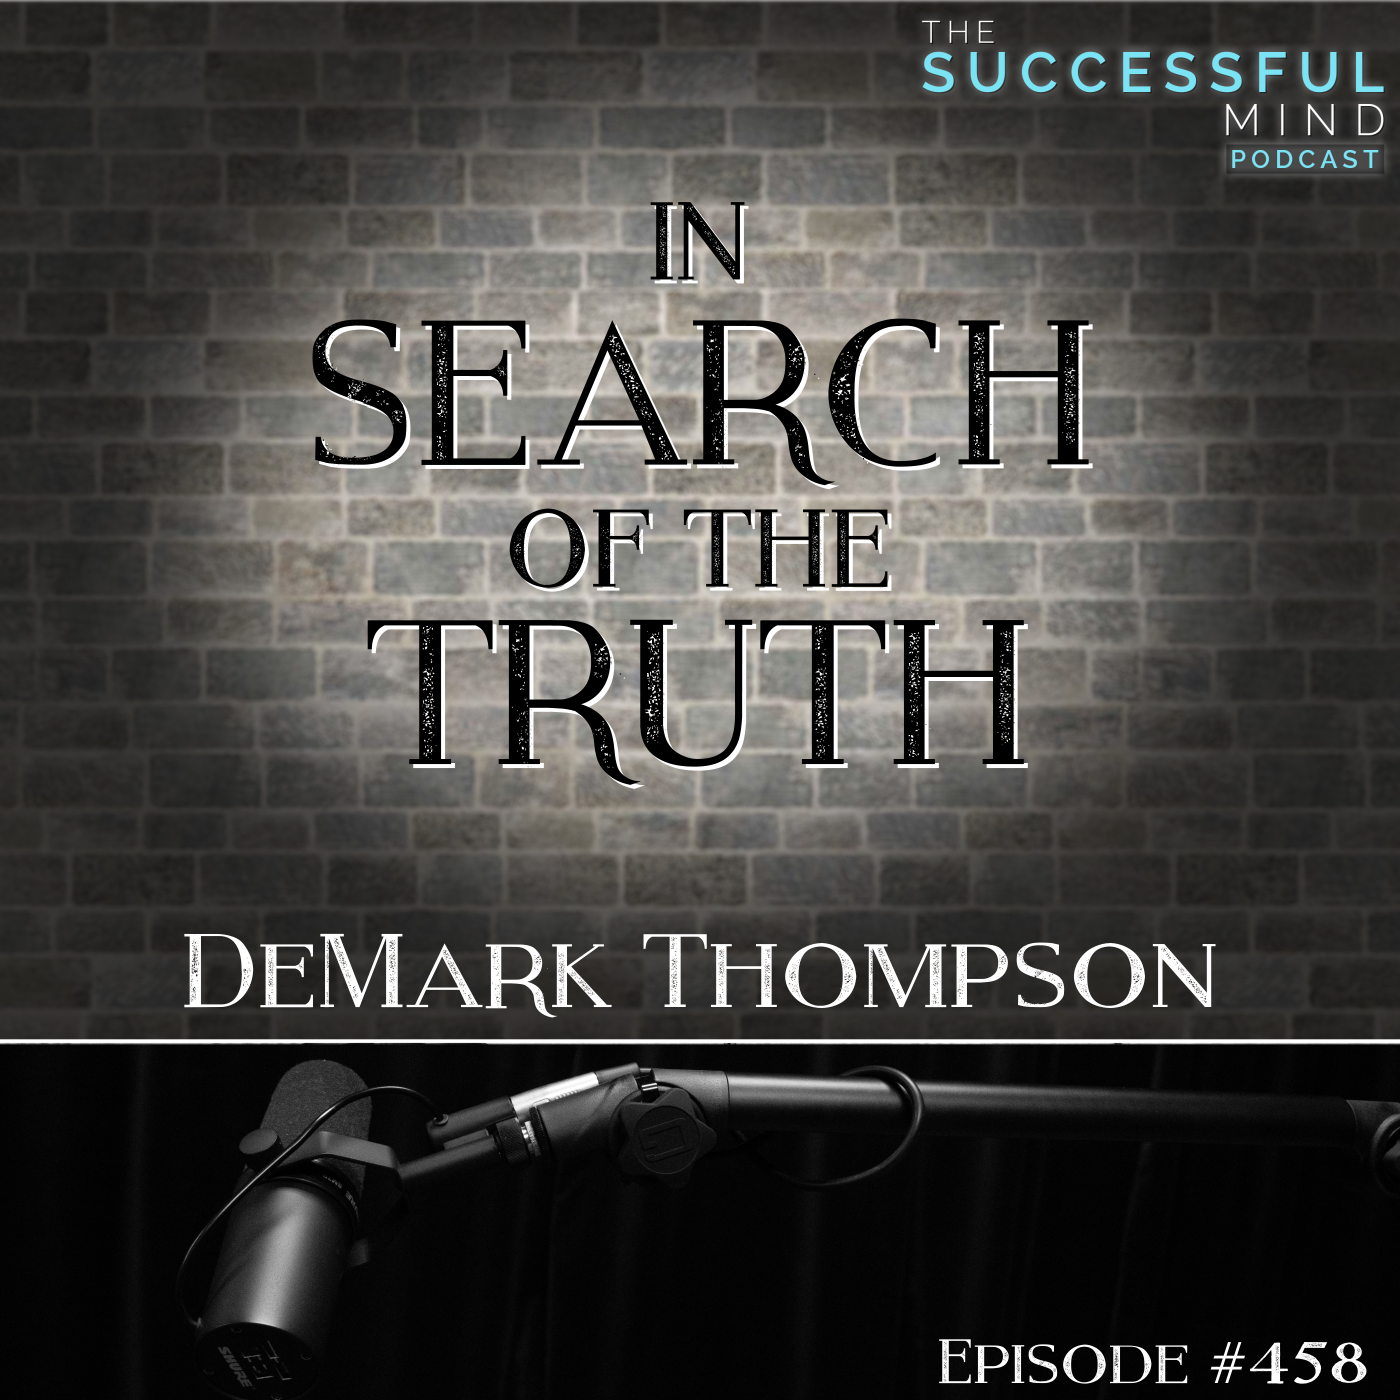 The Successful Mind Podcast - In Search of the Truth: DeMark Thompson